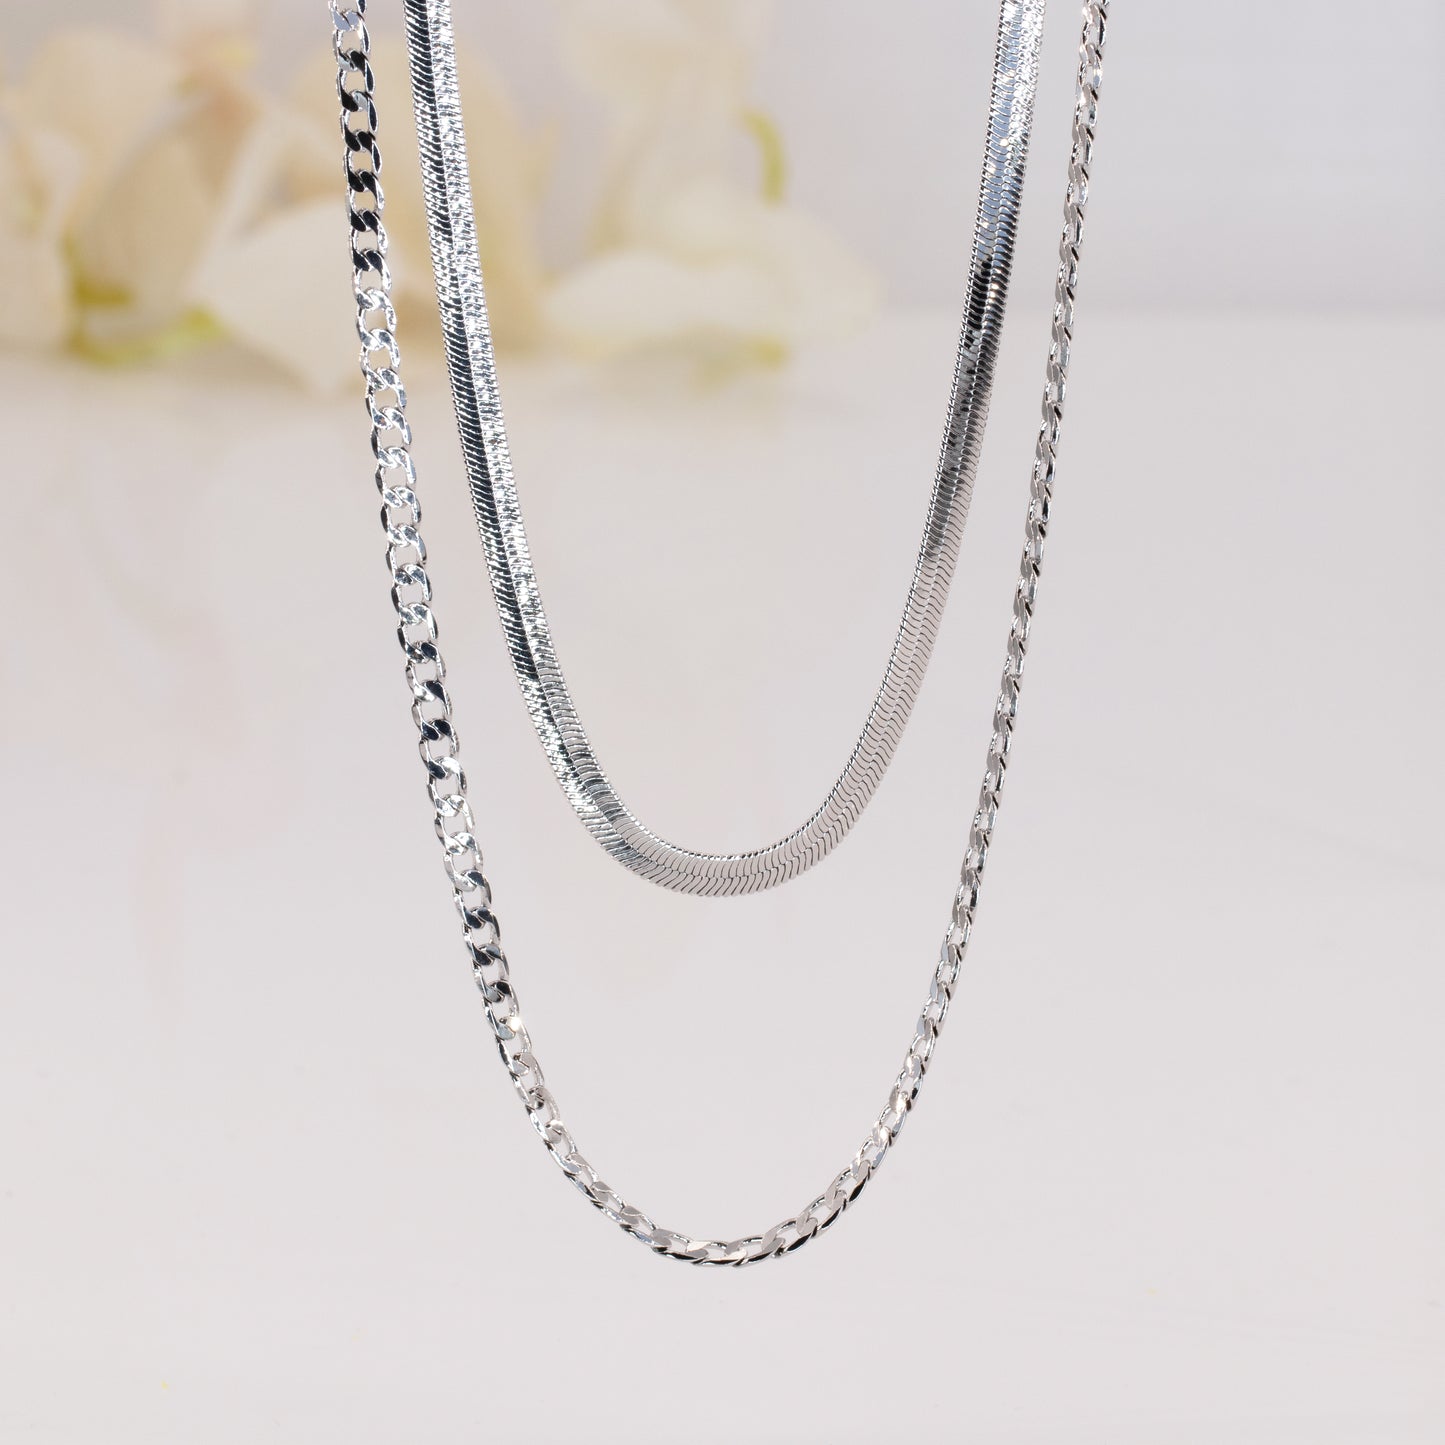 Layered Chain Necklaces Set